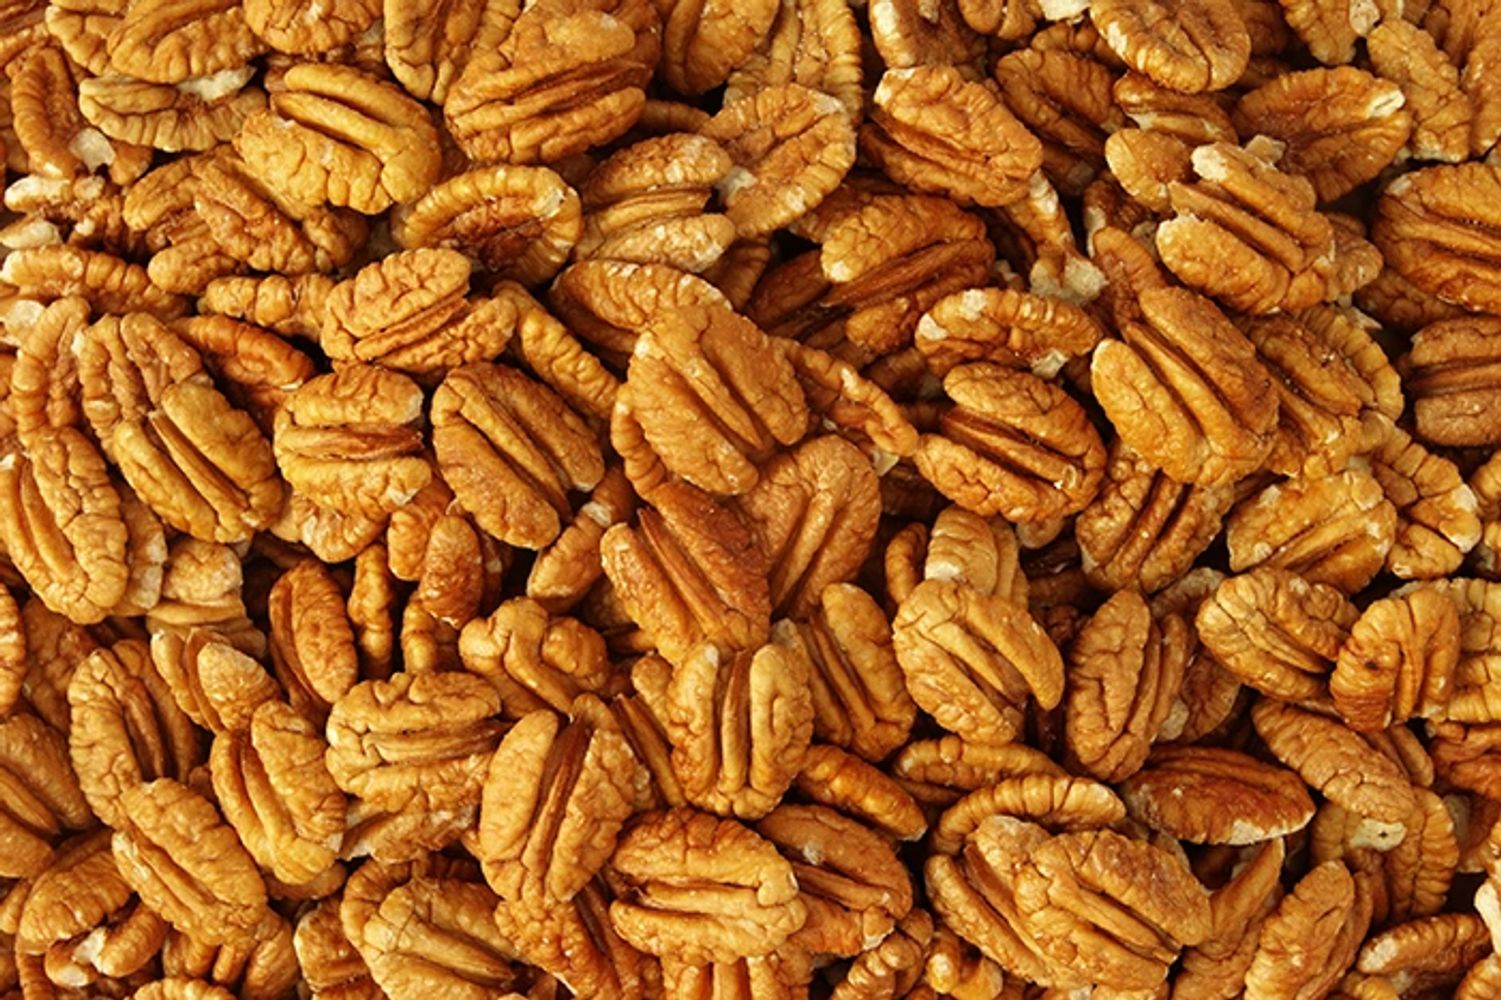 We are closed for the 2018-2019 season.  Please check back with us mid-October for new crop pecans. 